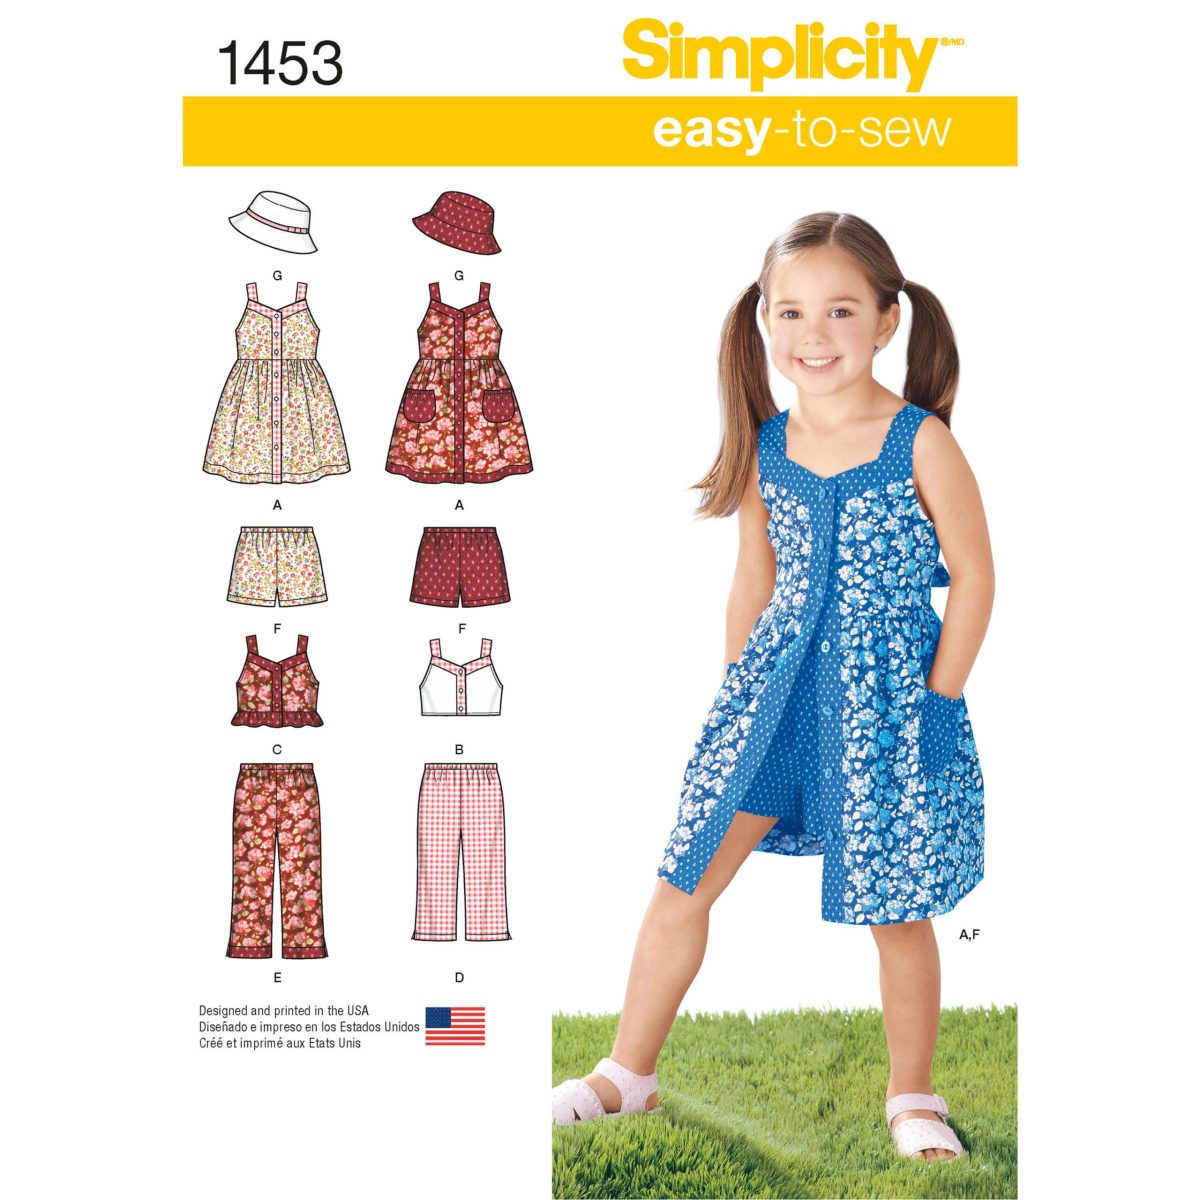 Simplicity Sewing Pattern 1453 Child's Dress, Top, Trousers or Shorts and Hat